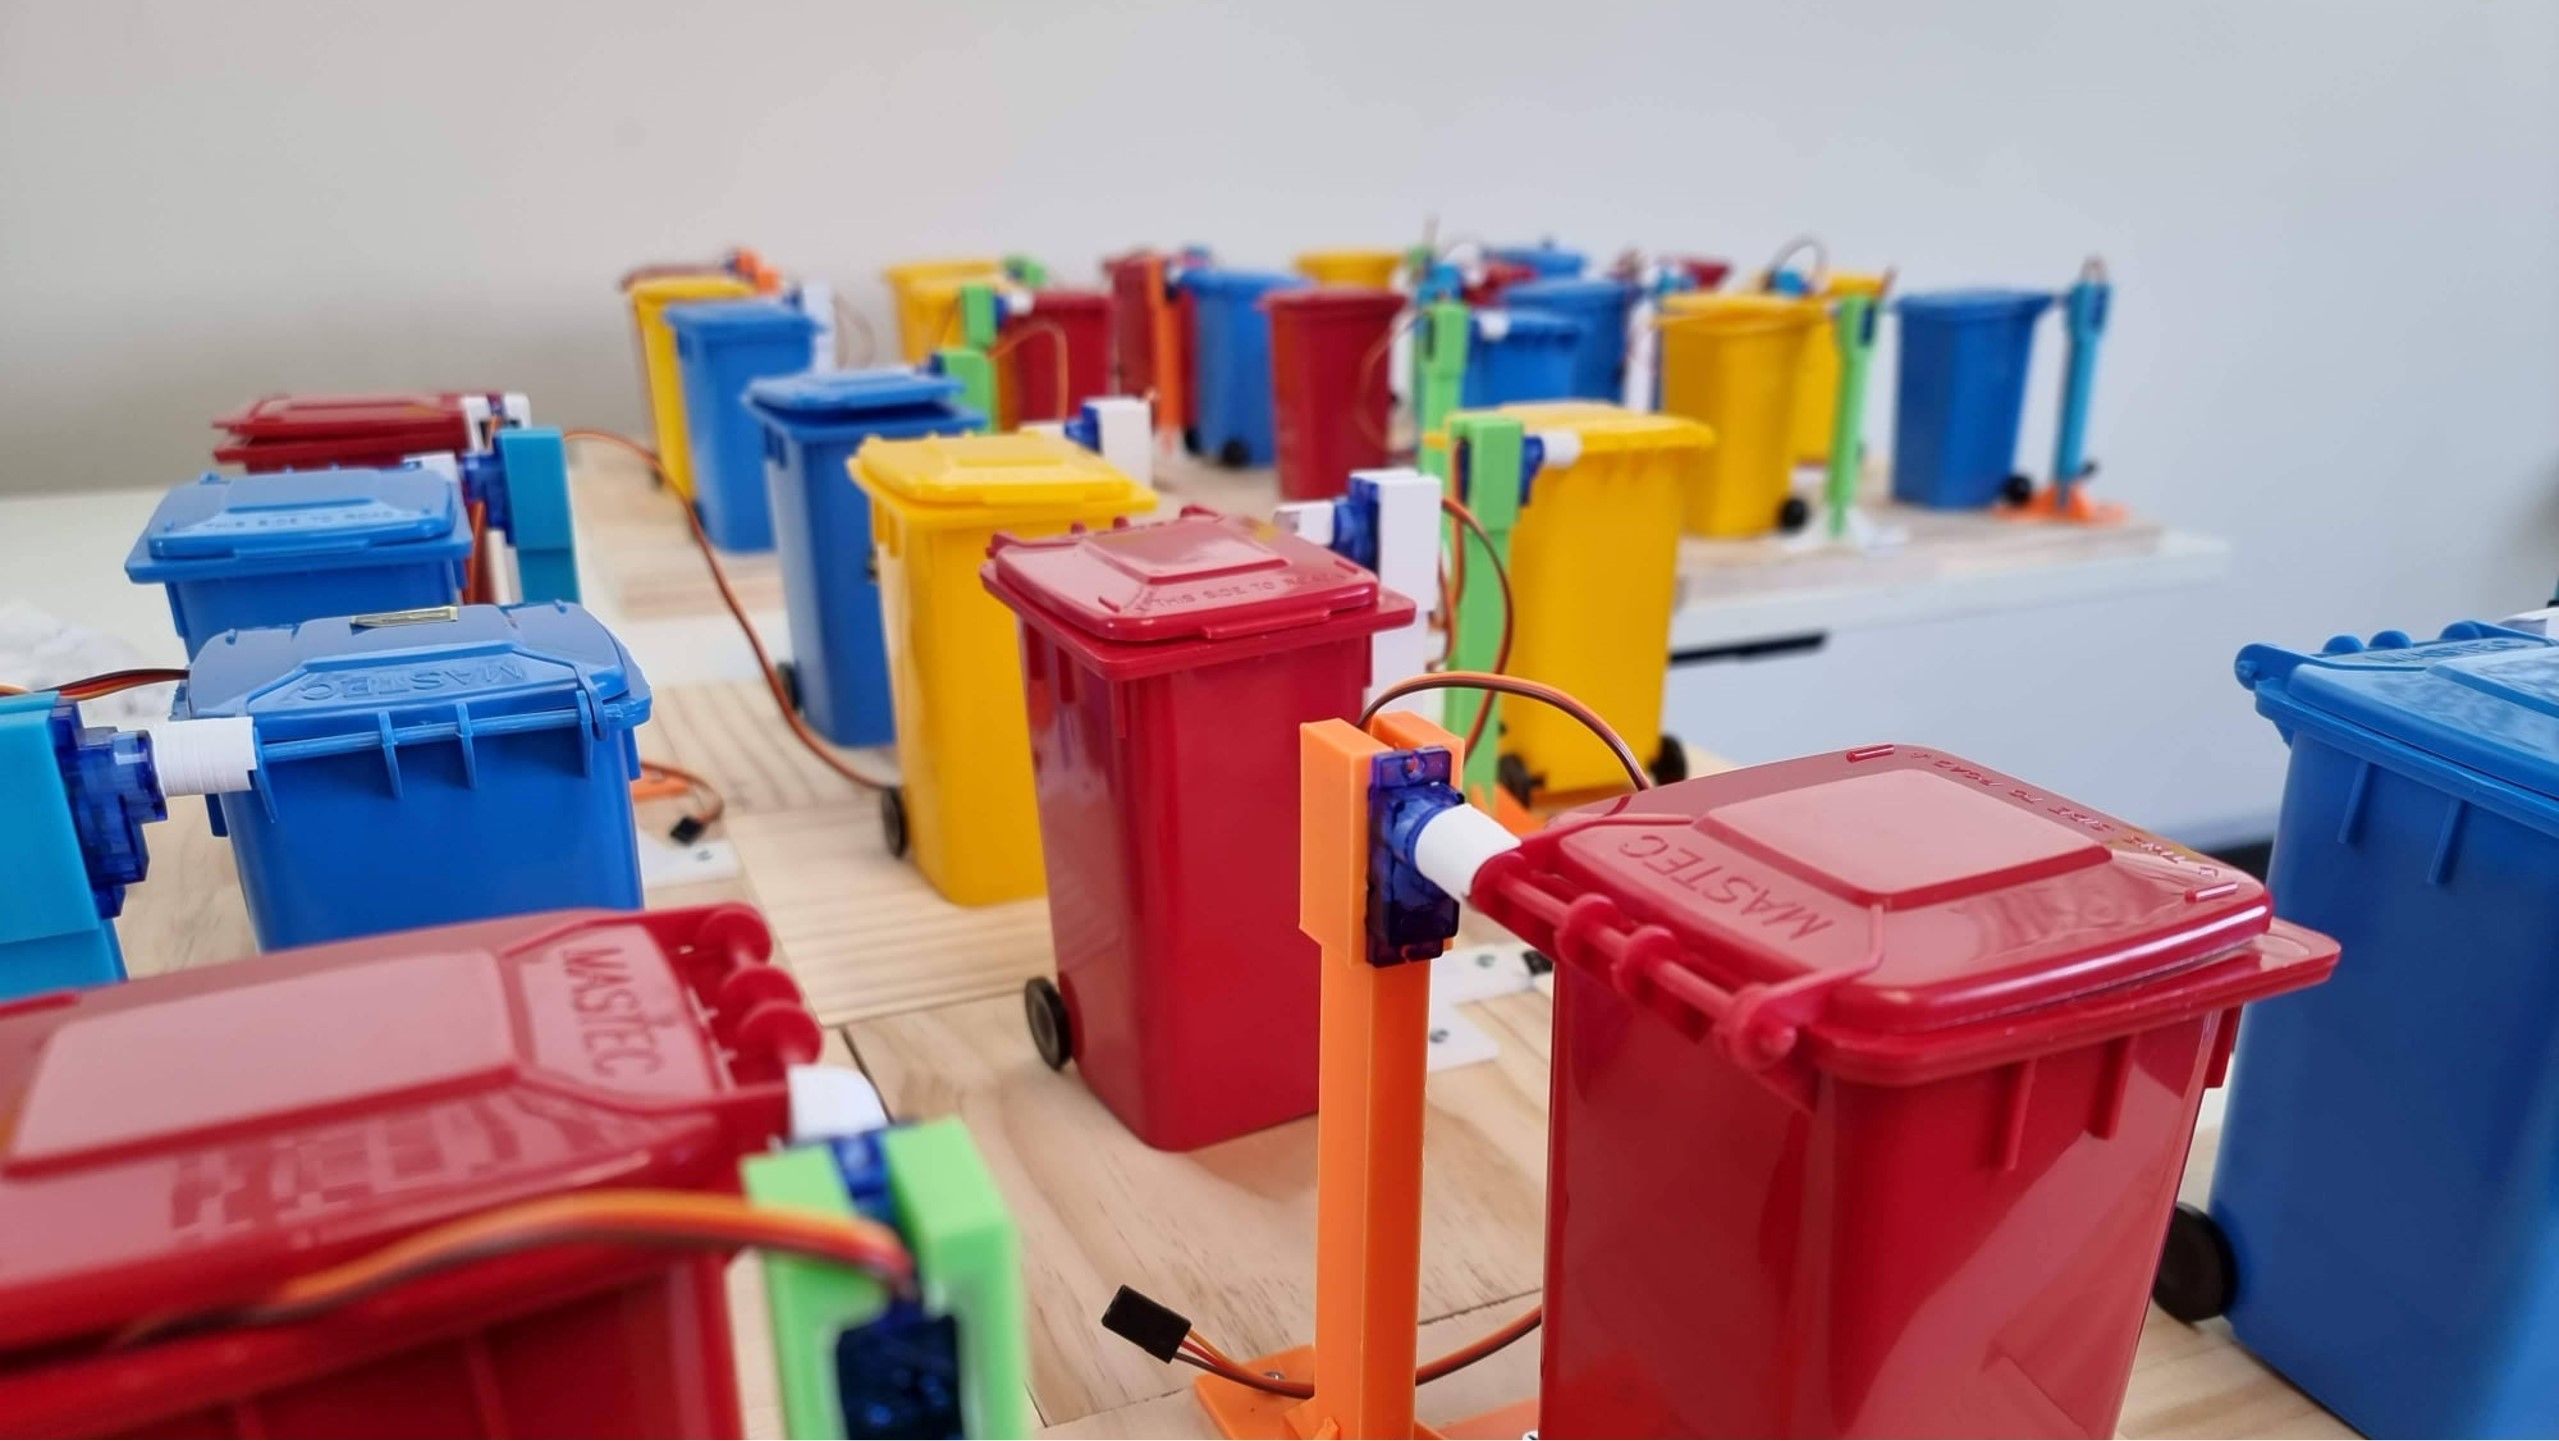 Mini garbage bins in red, blue and yellow are wired with tiny circuits for a KIOSC smart bin project